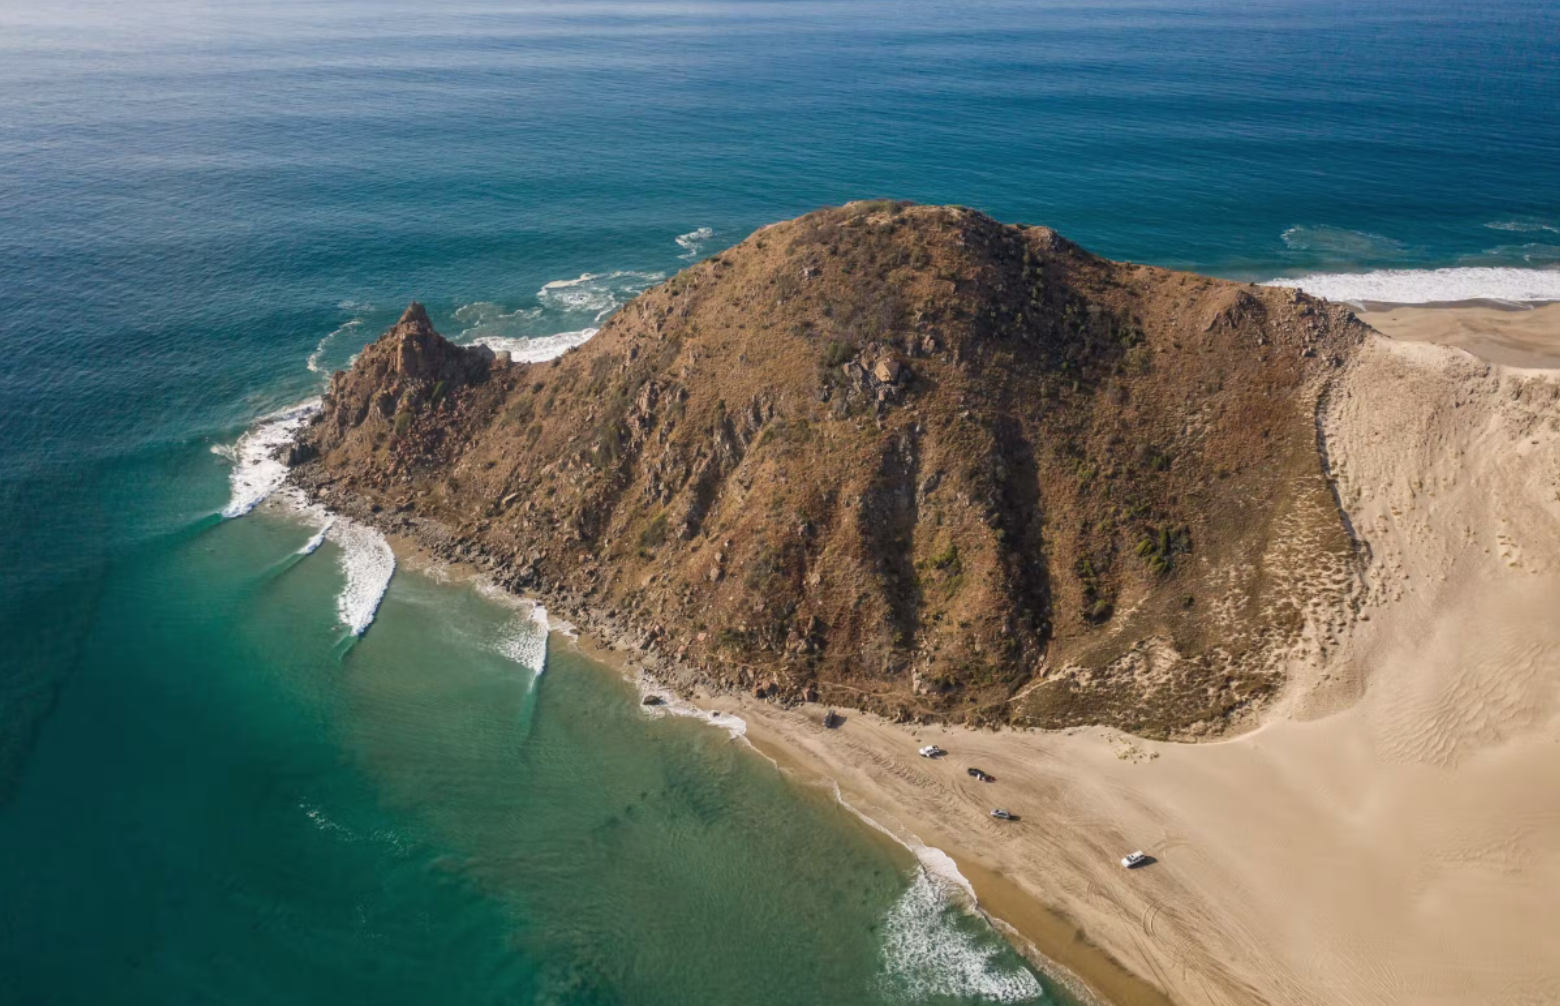 righthand point in Mexico, one of the cheapest surf destinations